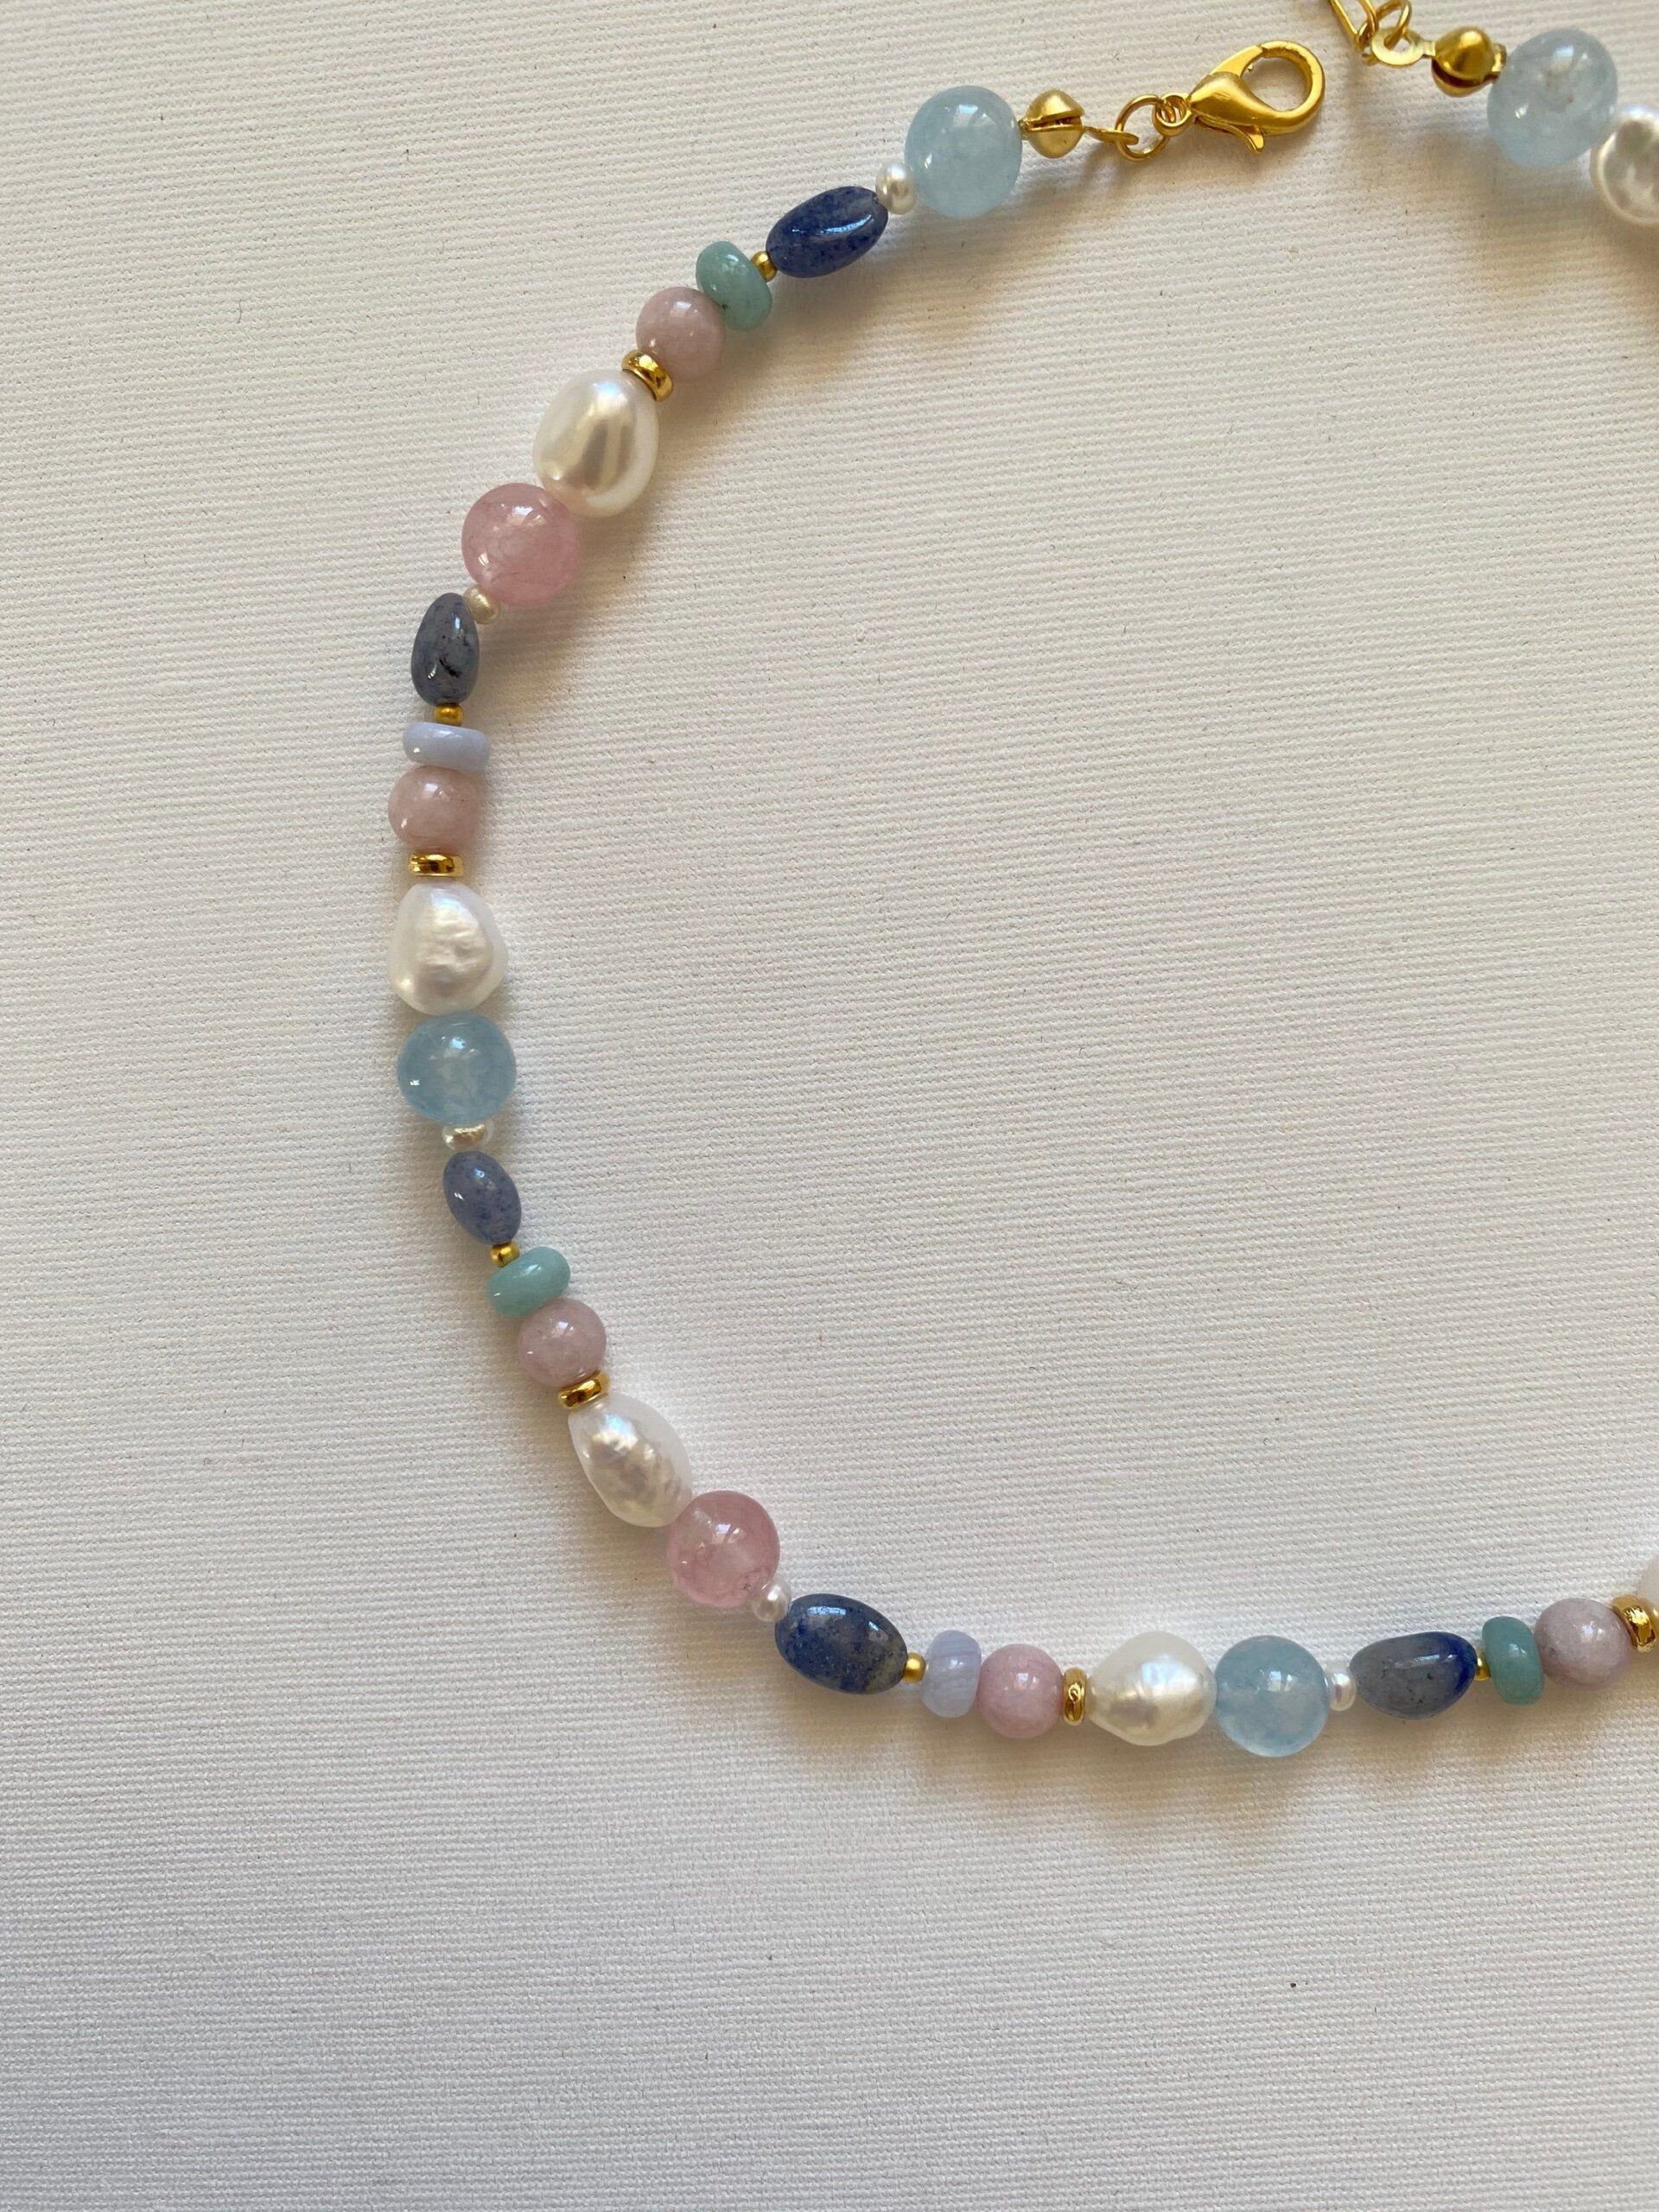 Never stop exploring with gemstones necklaces